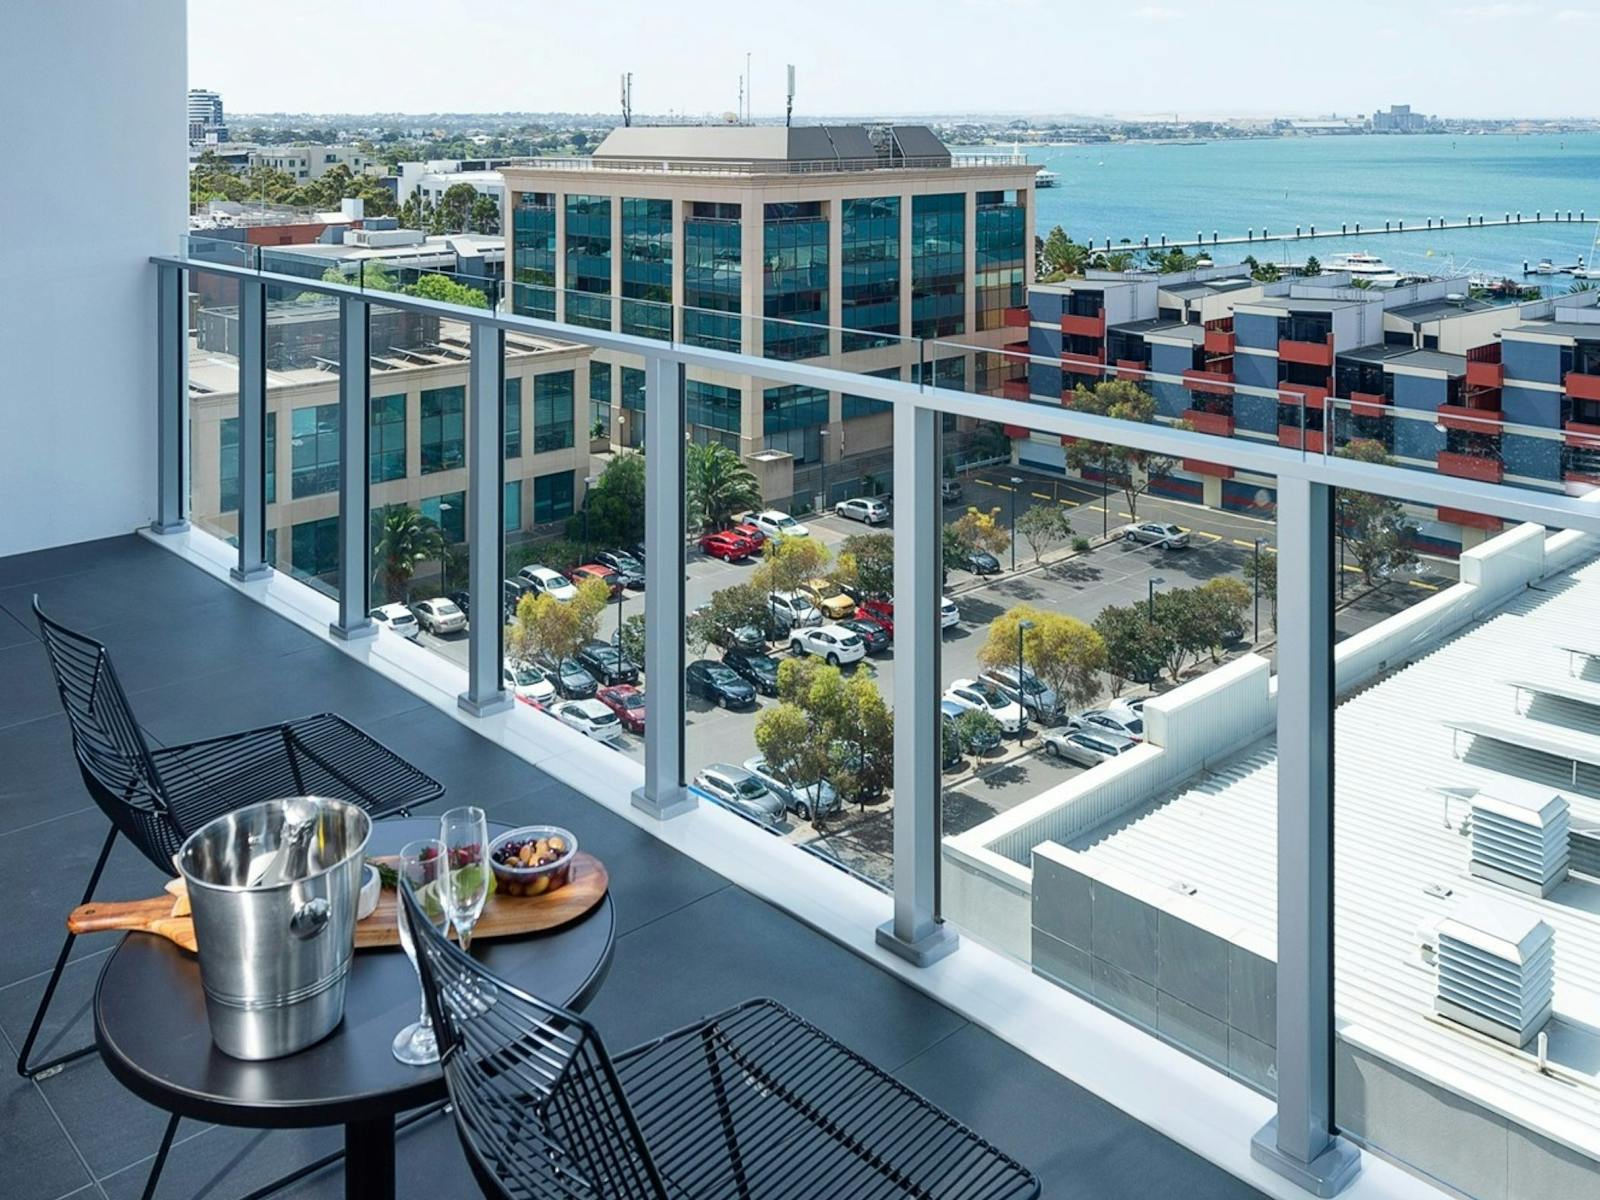 The balcony at R Hotel overlooking the waterfront.